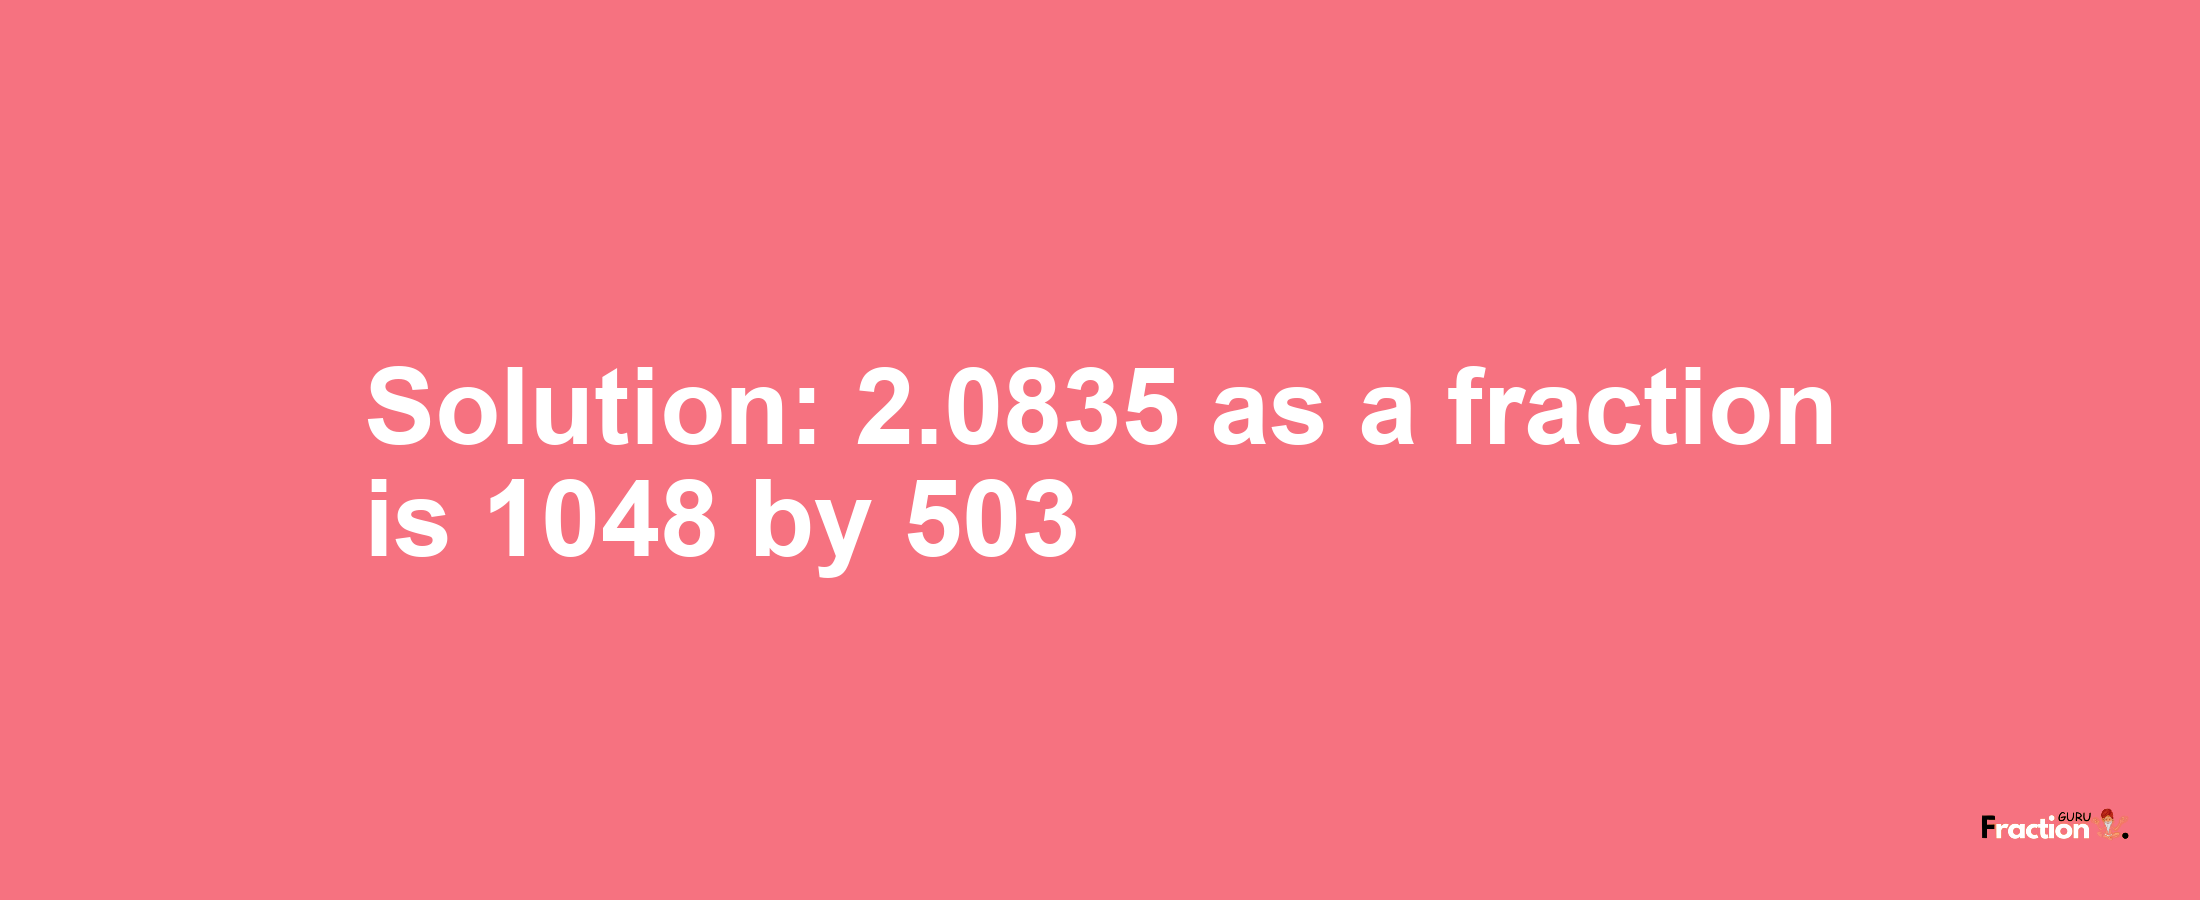 Solution:2.0835 as a fraction is 1048/503